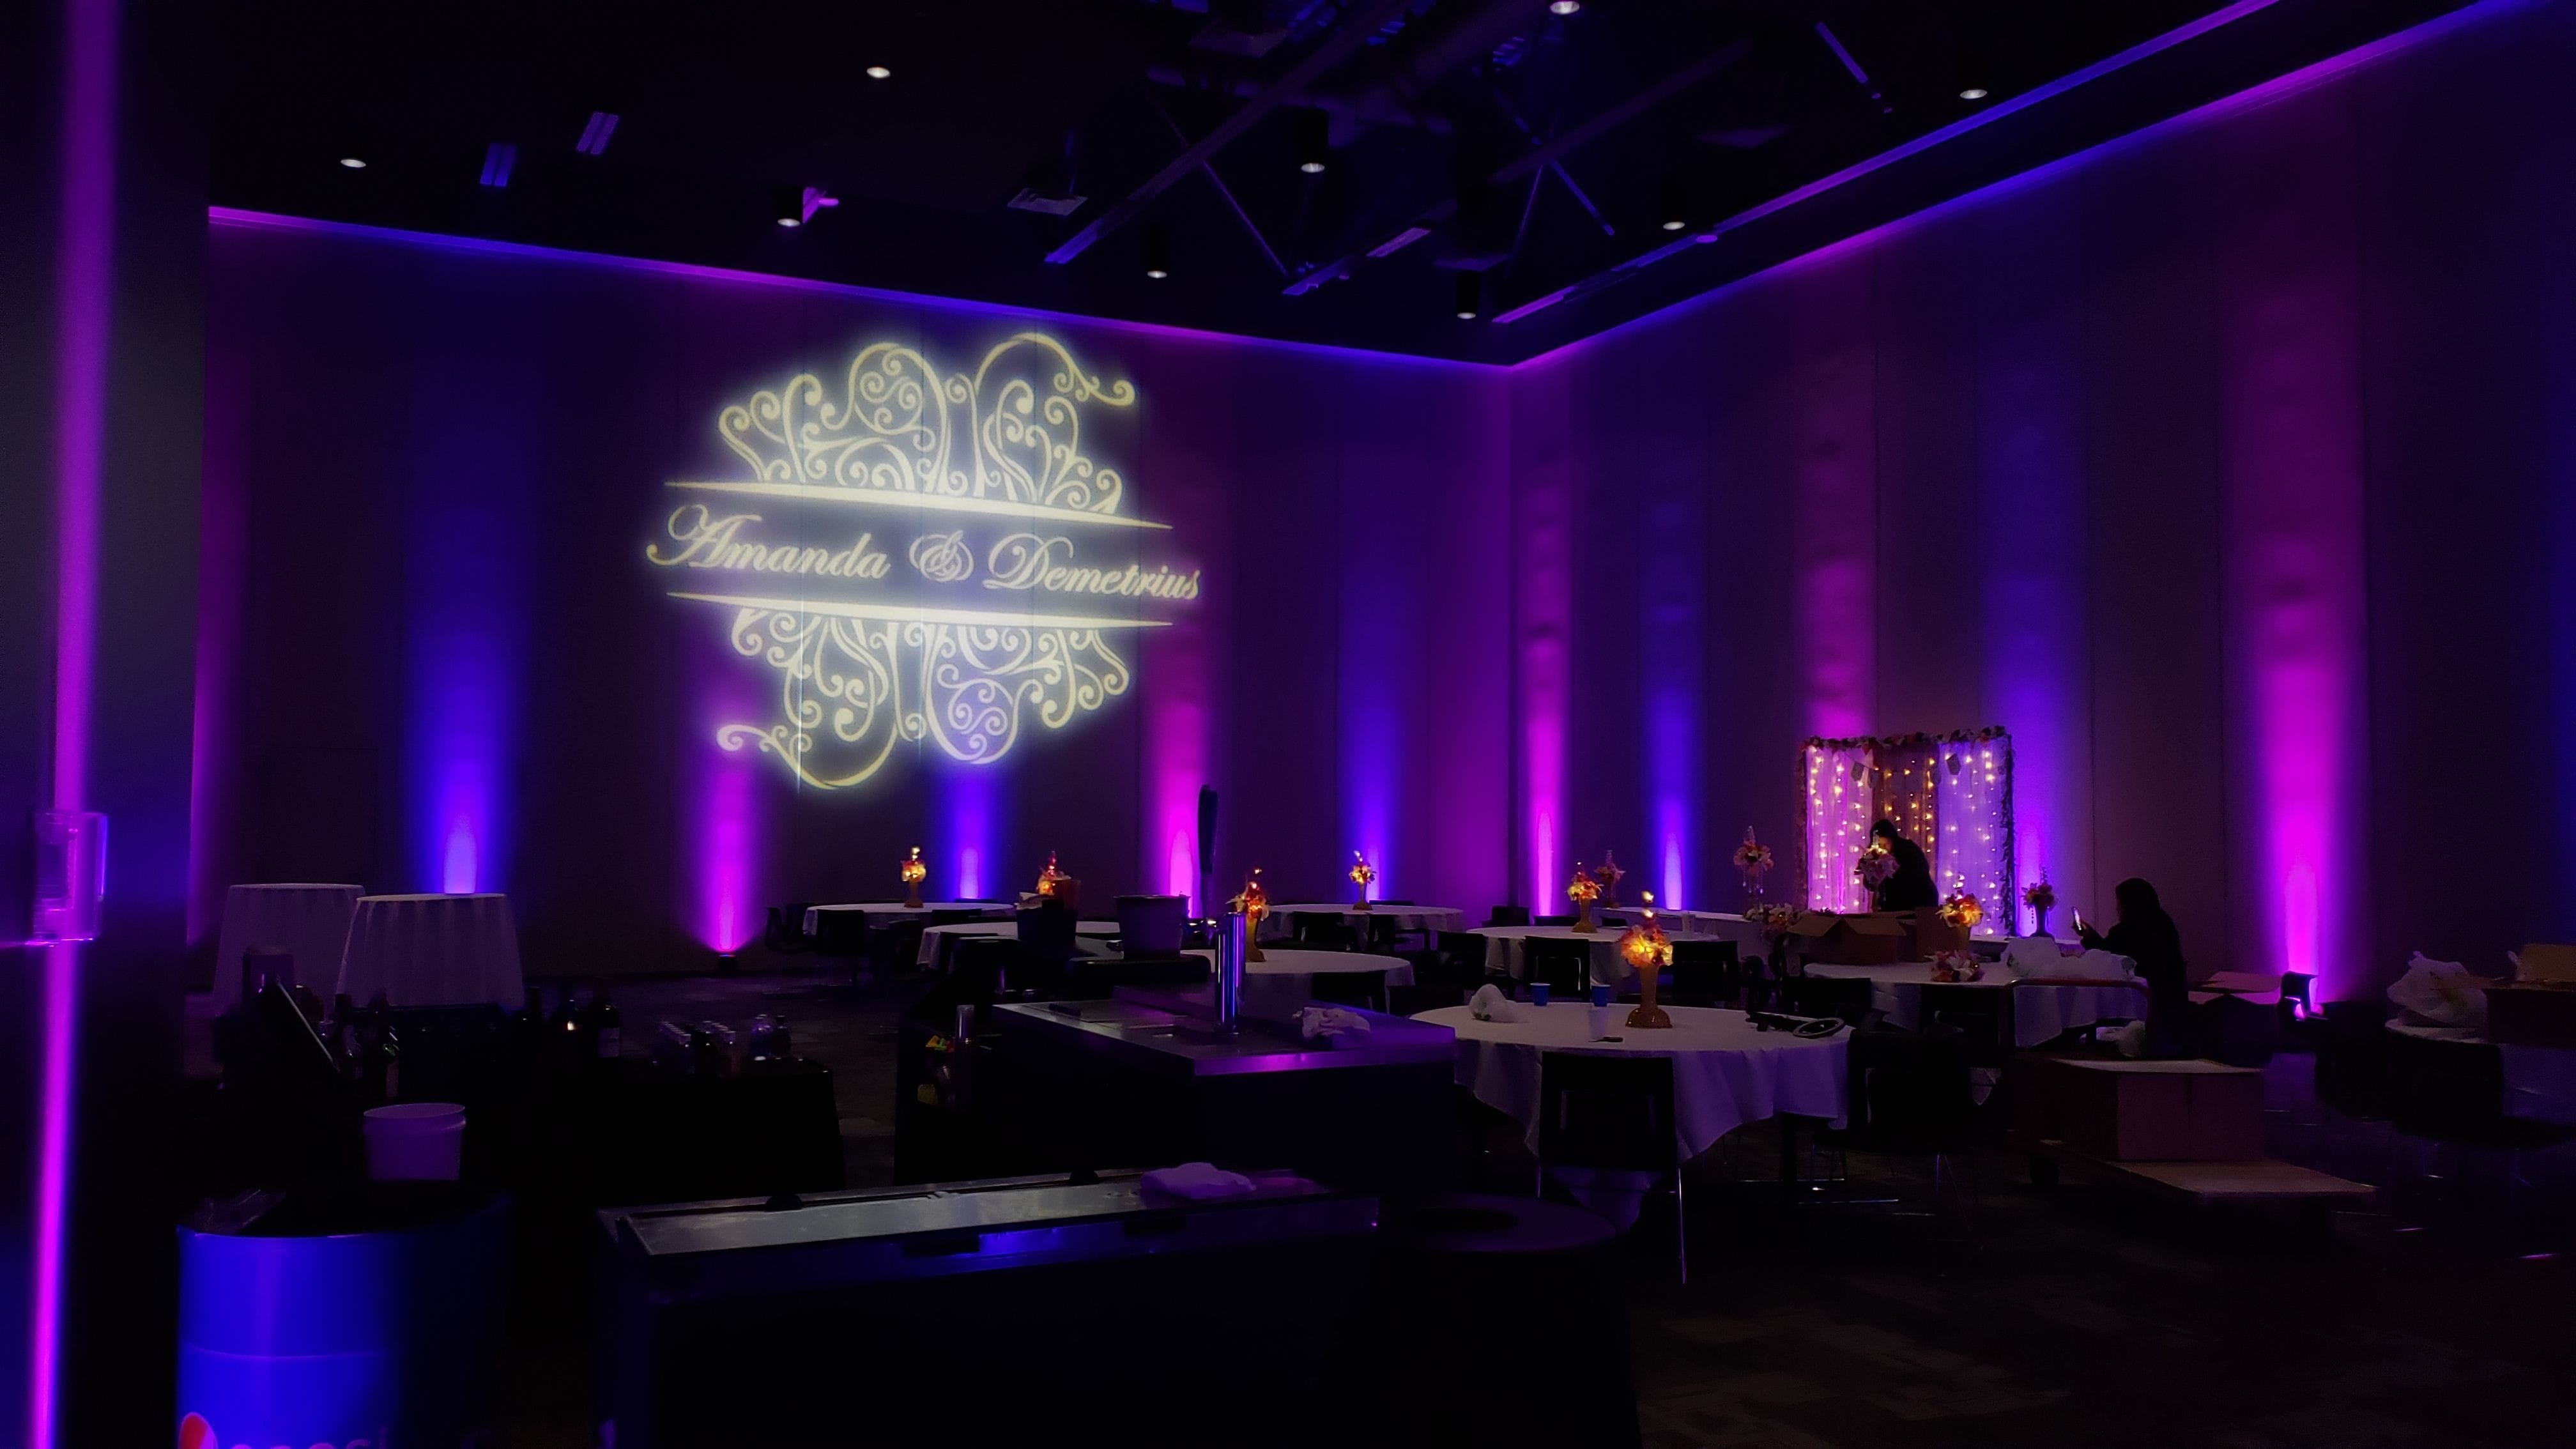 Wedding lighting at Black Bear Casino with a large monogram on the wall